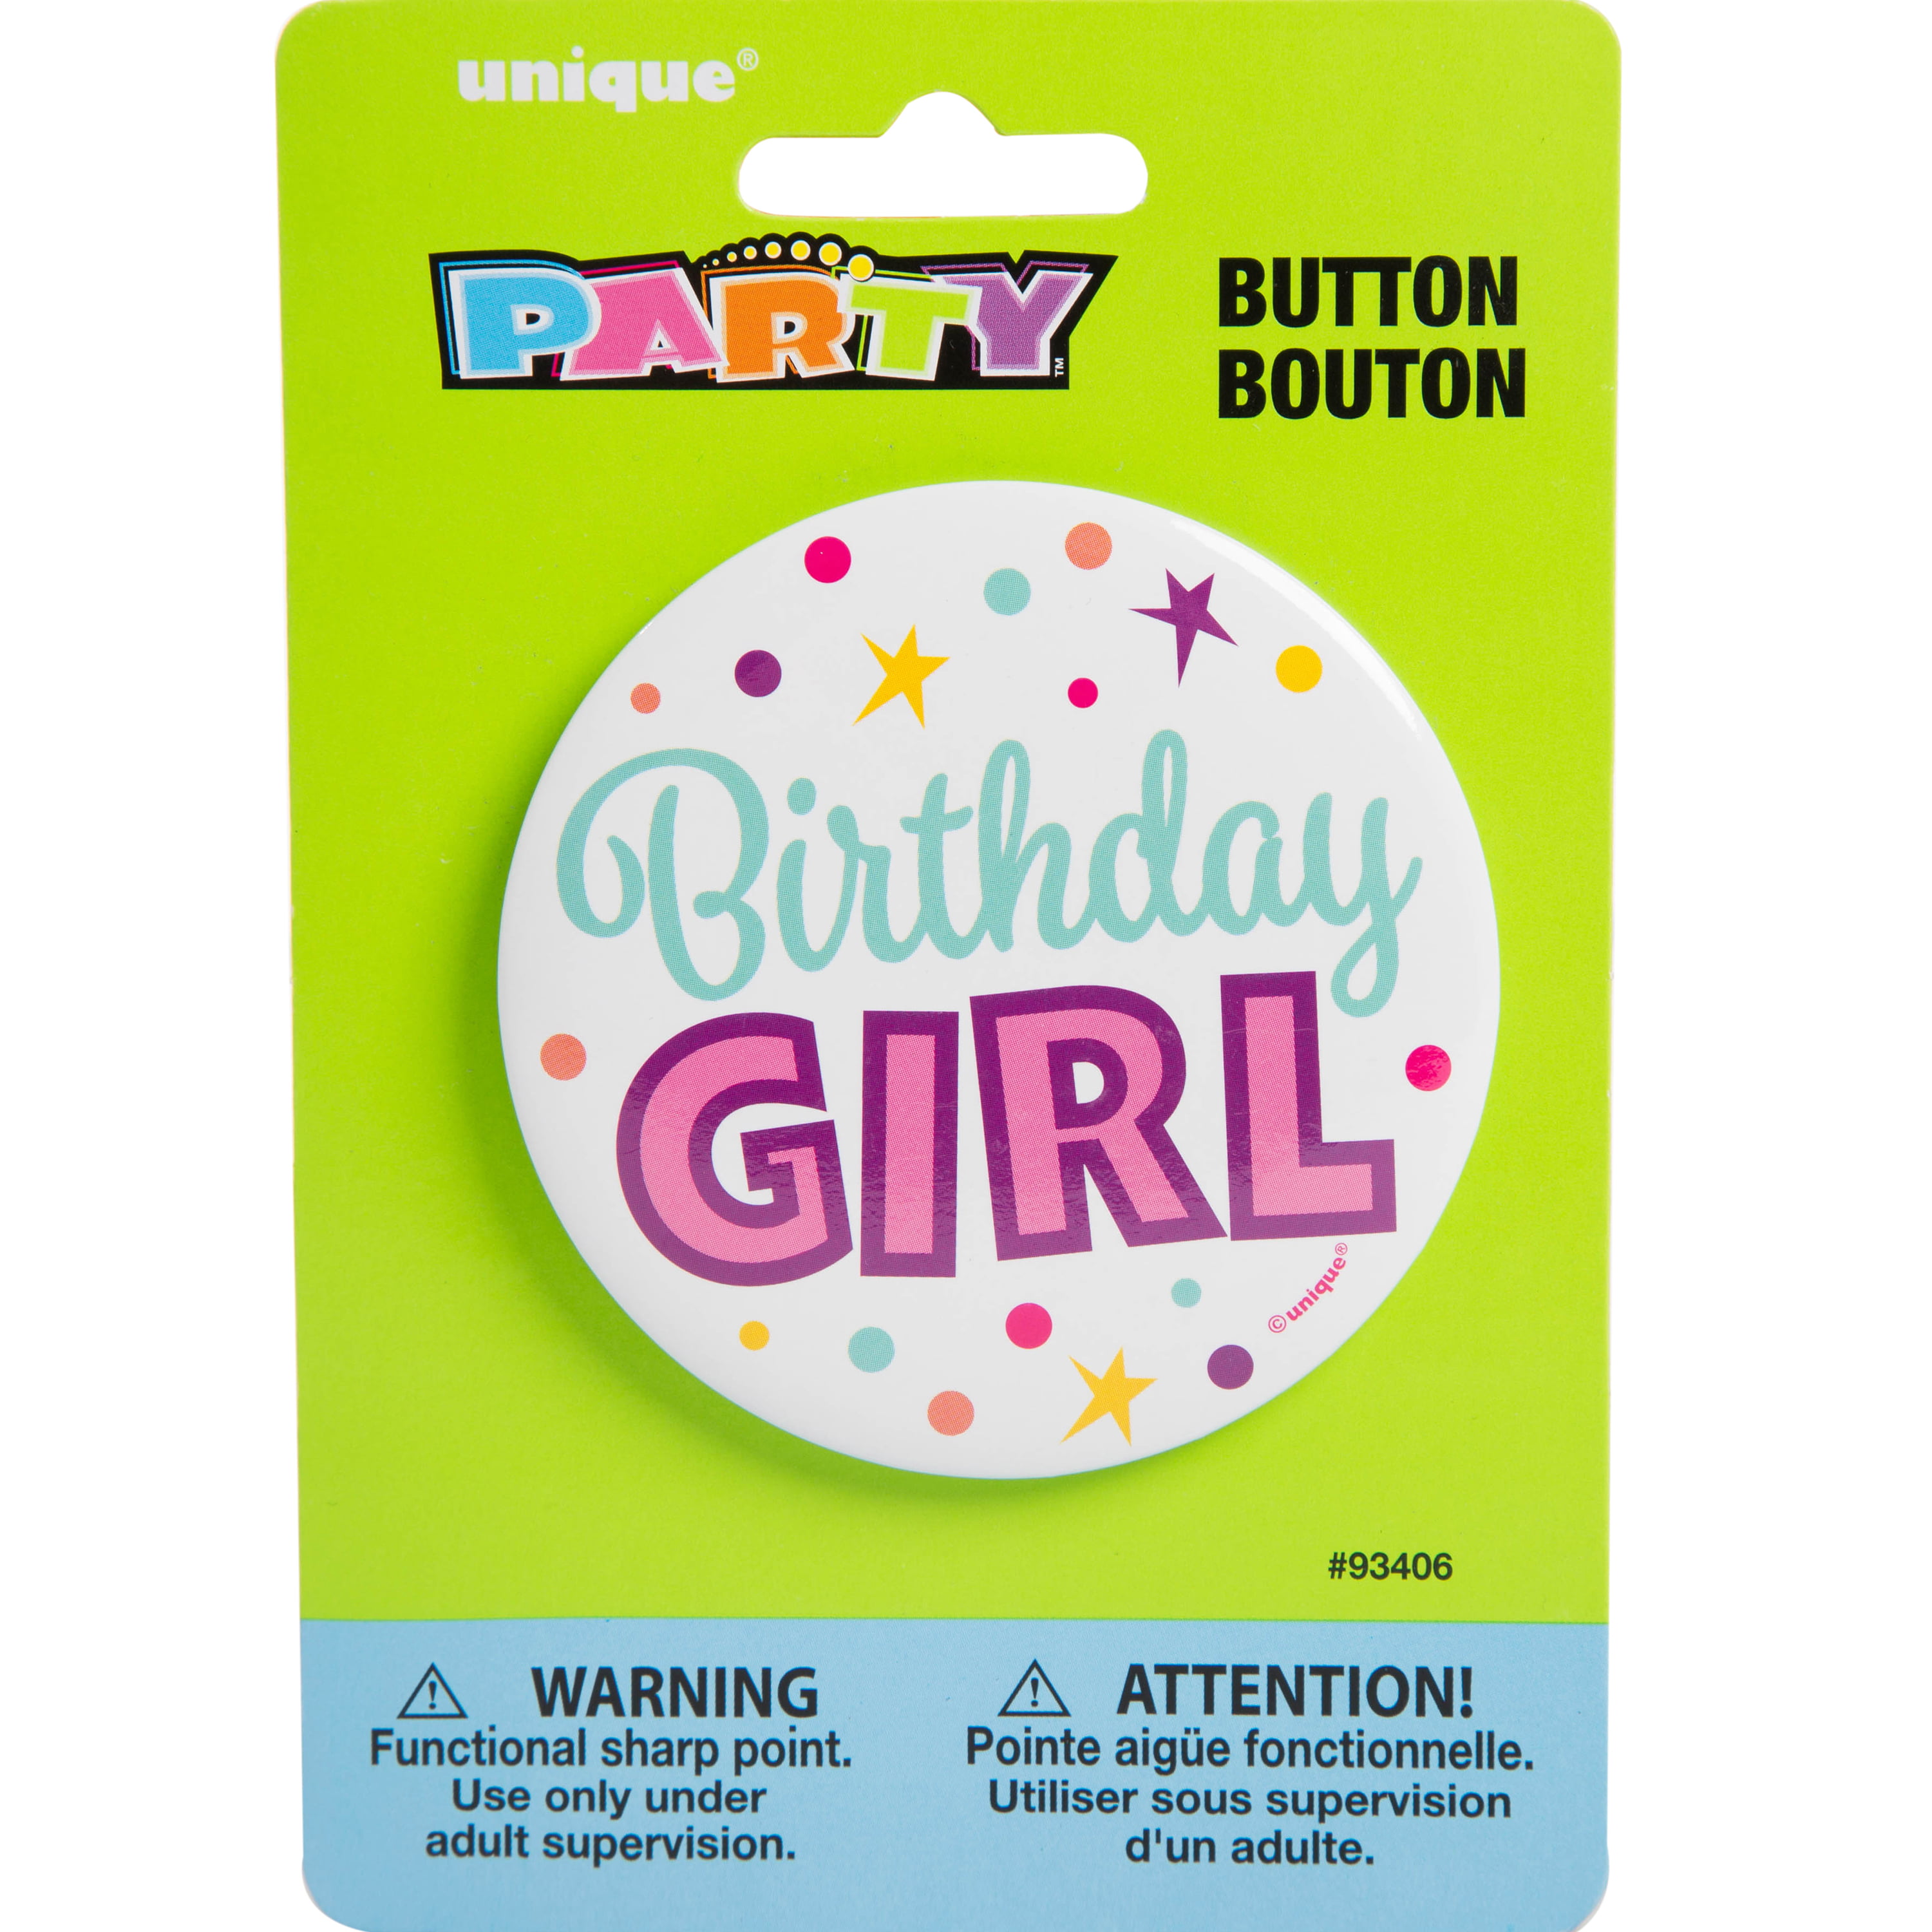 1 x 5cm BIRTHDAY GIRL BUTTON GIRLS PARTY FAVOURS COSTUME ACCESSORY METAL BUTTONS 